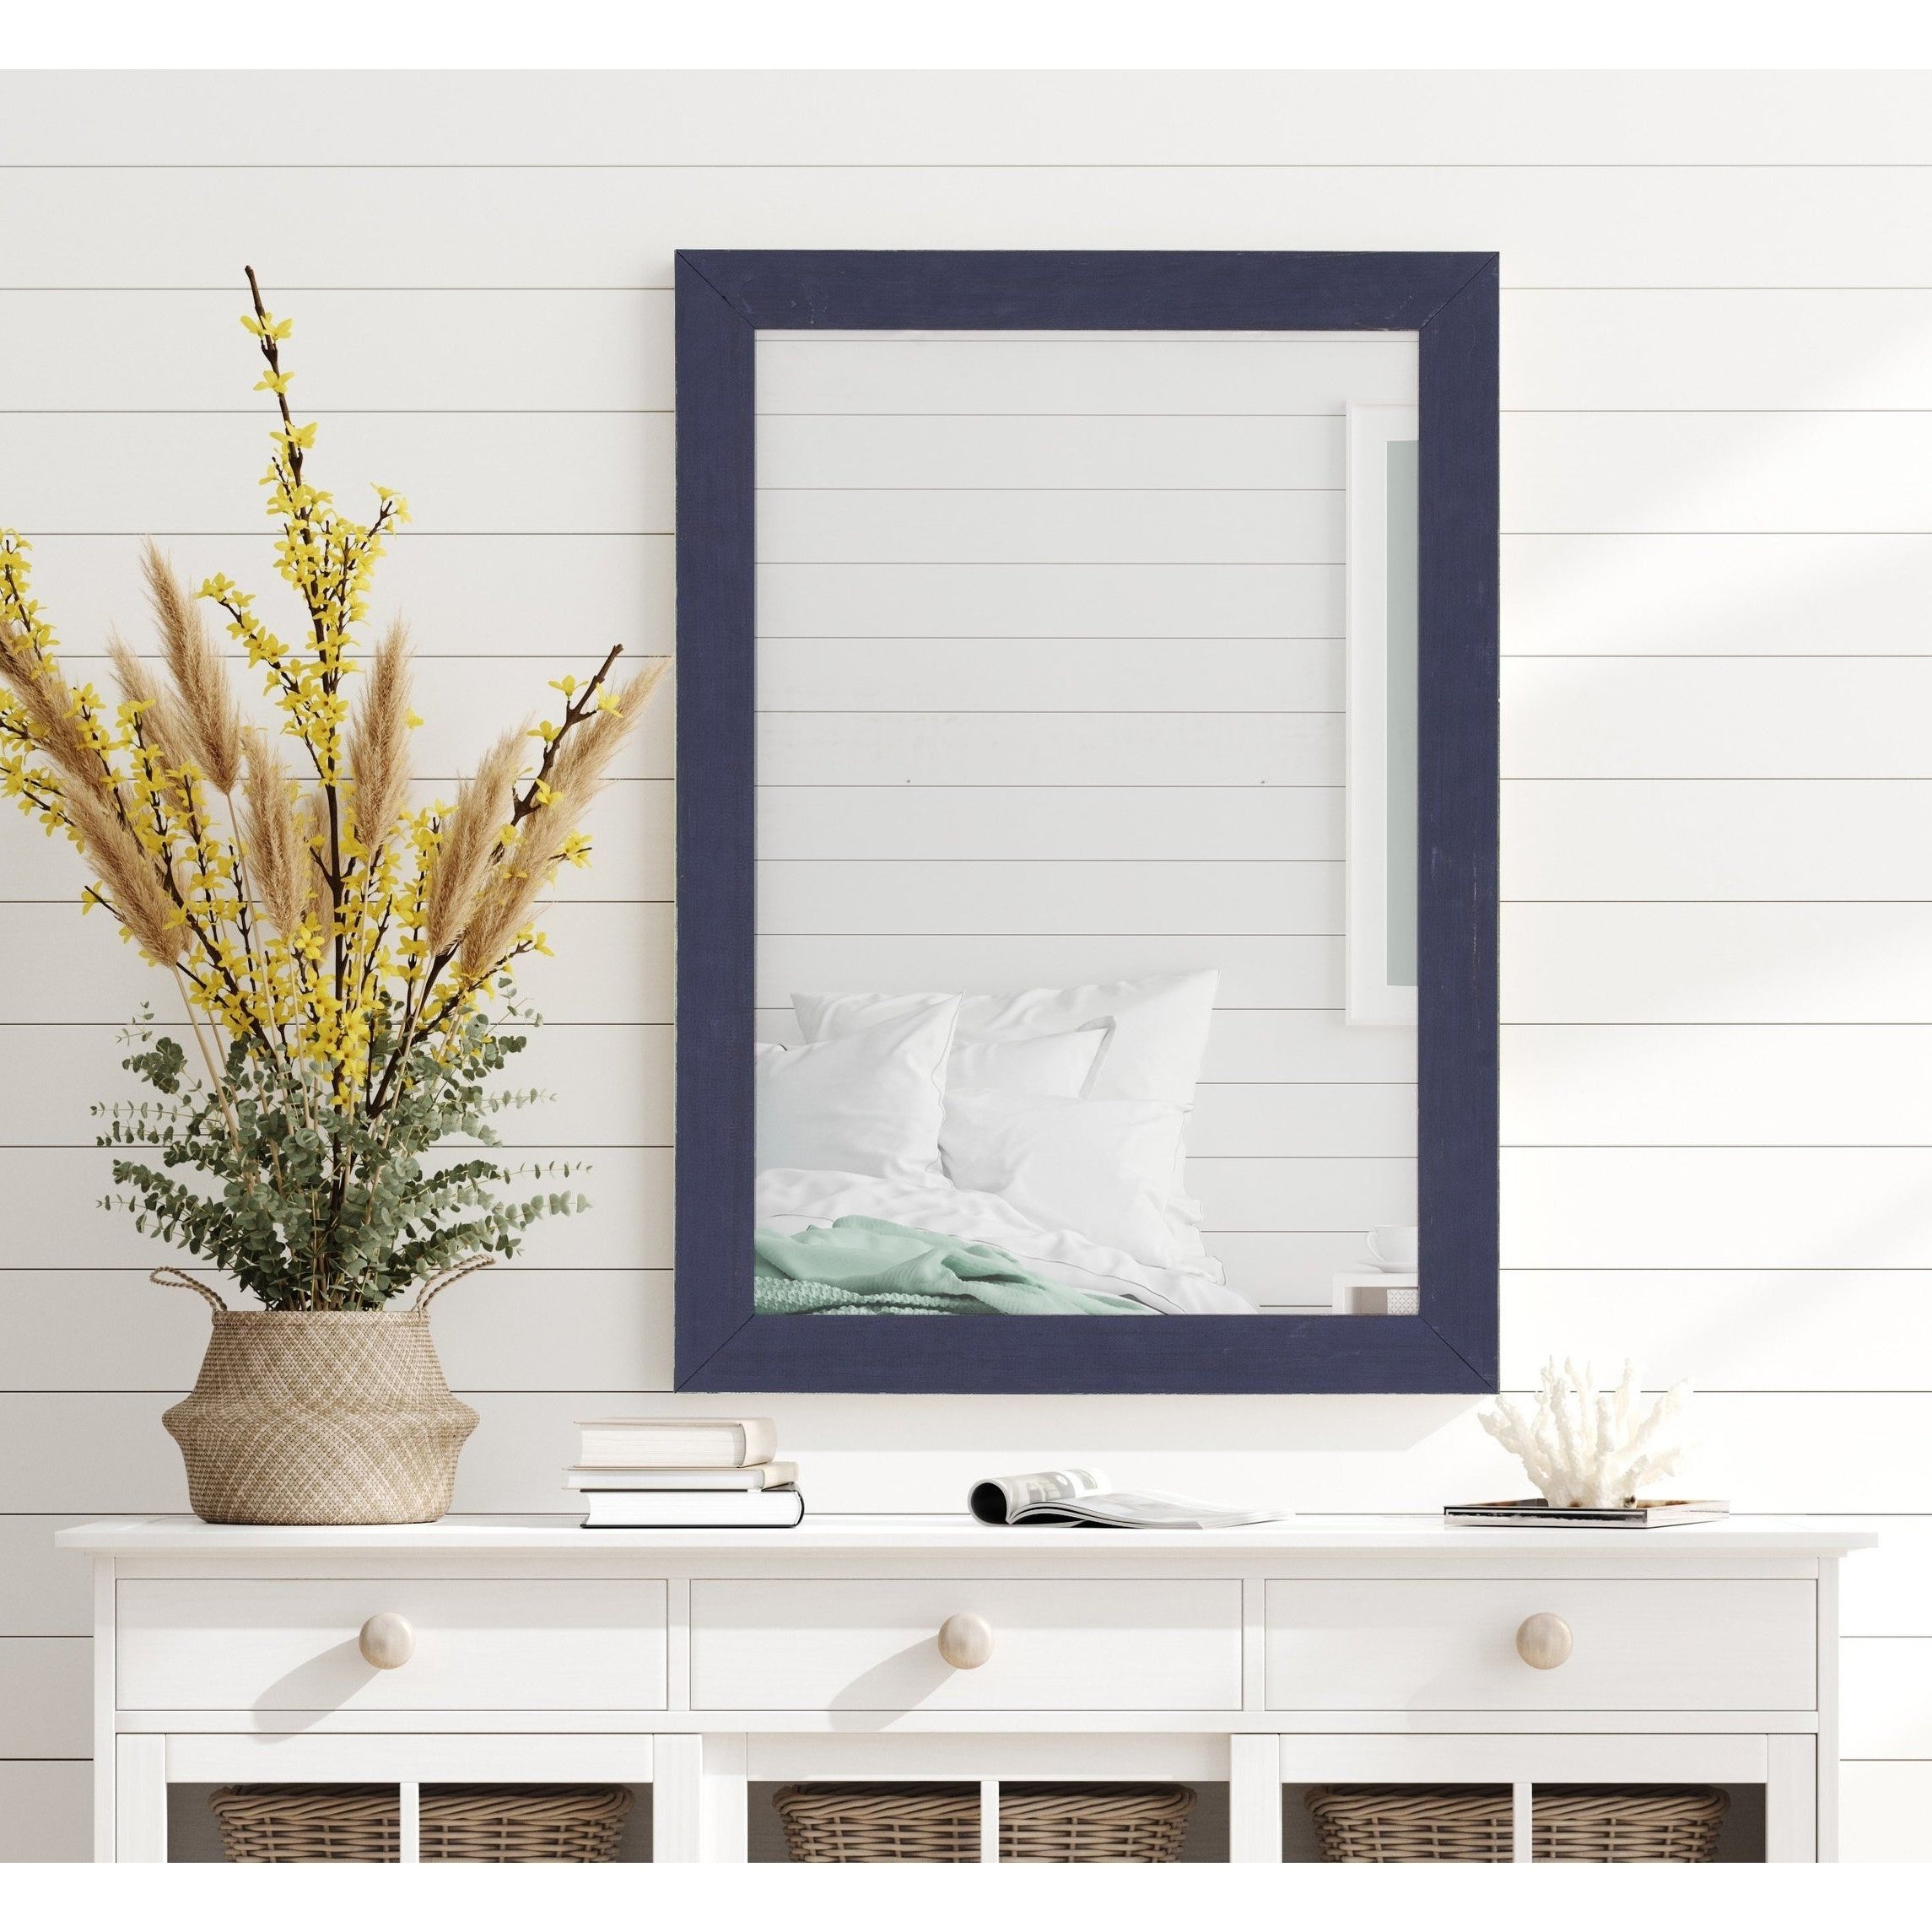 Shop Online At Overstock Throughout Coastal Style Wall Mirrors 